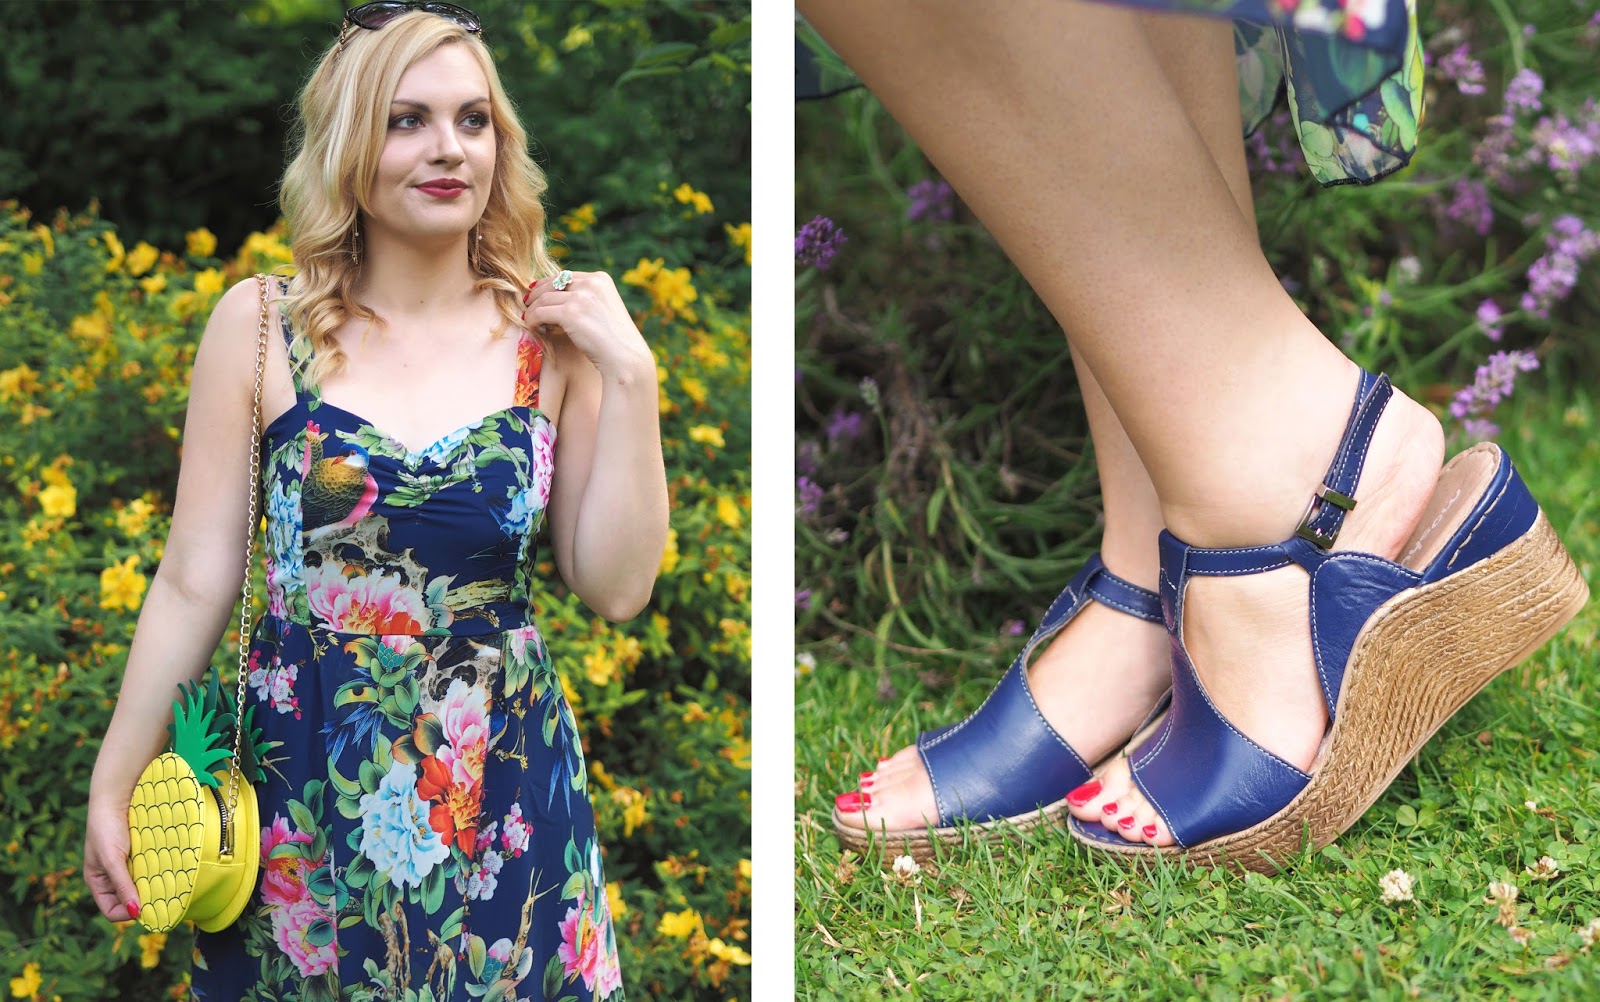 Colourful Wedges Styled 5 Ways feat. Moshulu, Moshulu Shoes, Colourful Shoes, Ways To Wear, Shoe Giveaway, Outfit Ideas, Fashion Blogger, Style Blogger, UK Blogger, Outfit Inspiration, Street Style Fashion, UK Fashion Blogger, Fashion Influencer